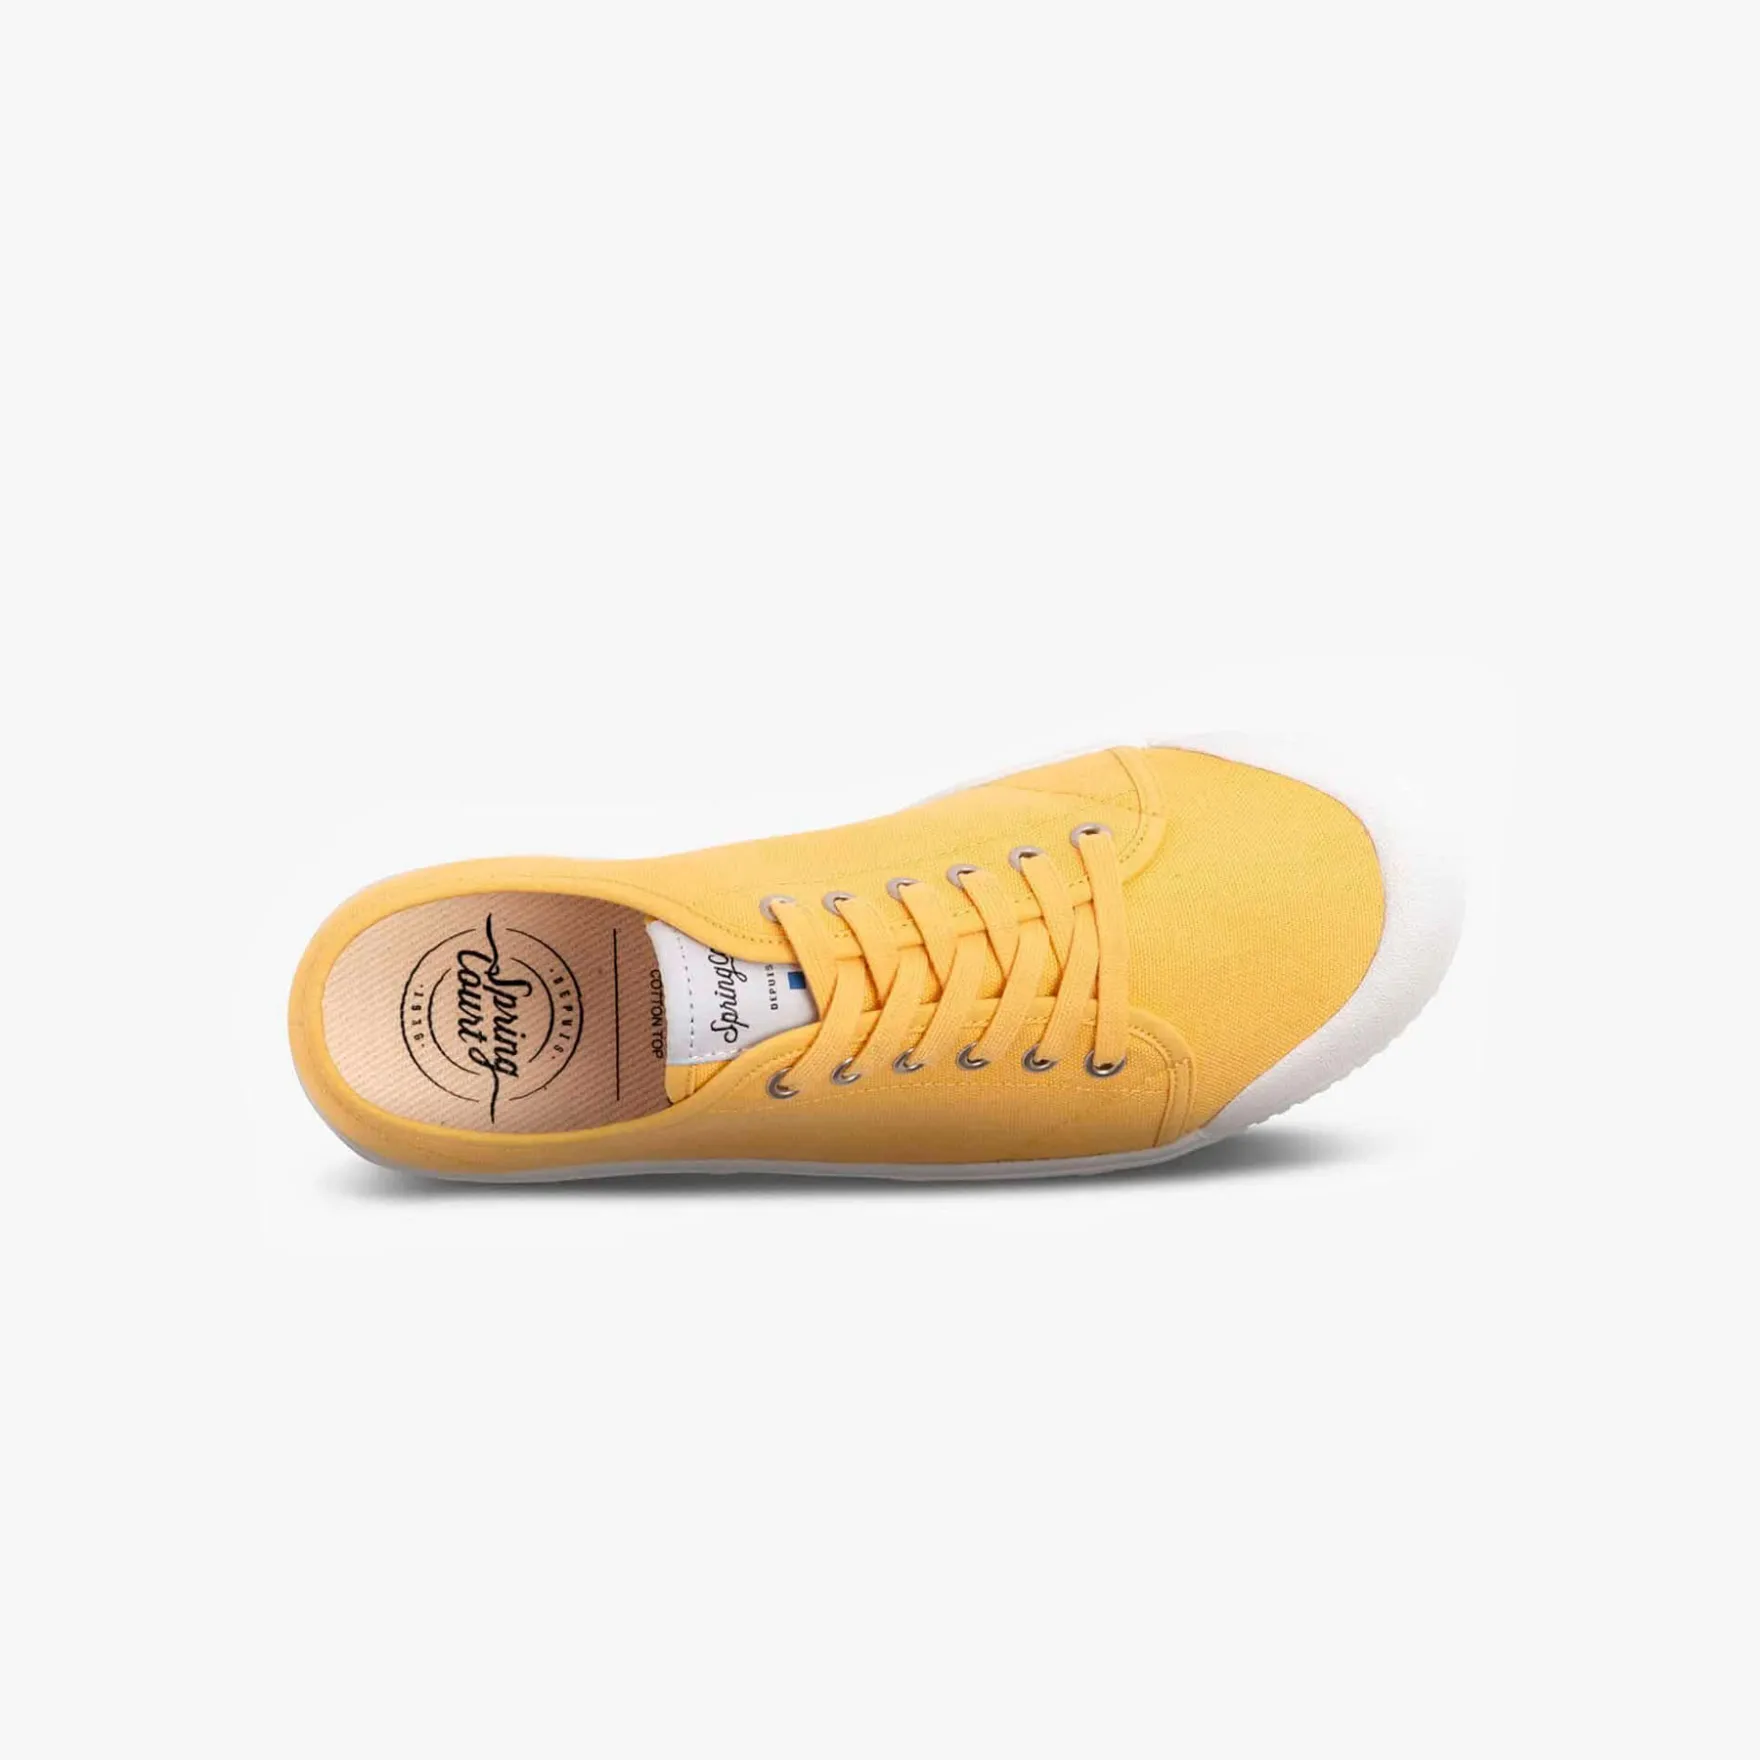 yellow canvas sneakers